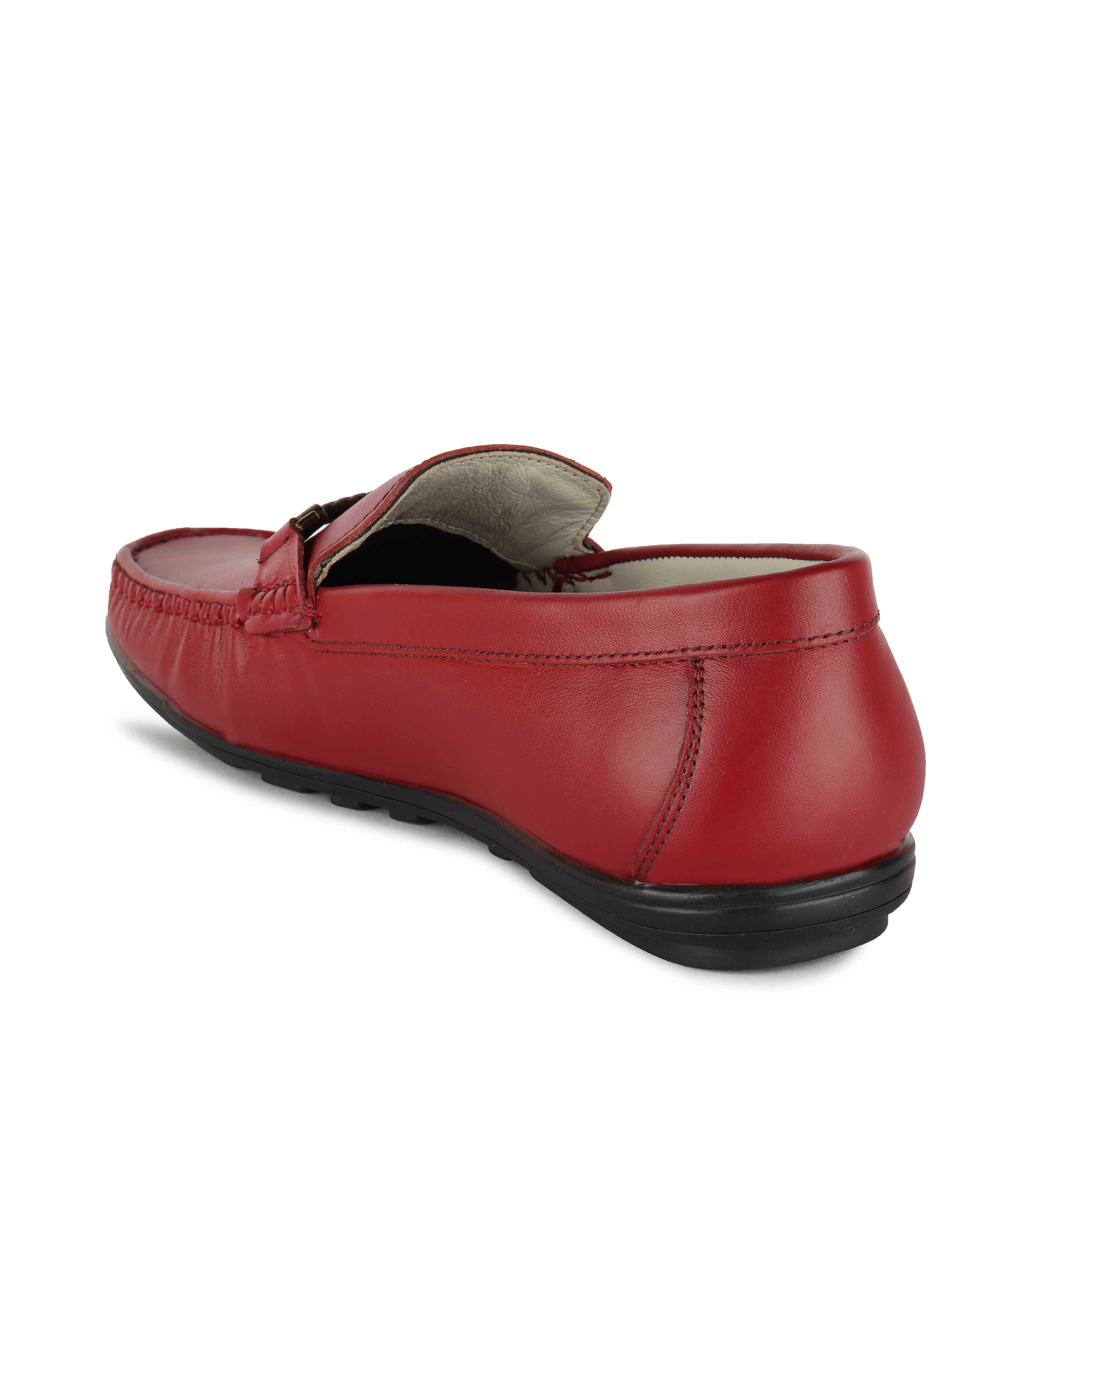 Cherry Red Loafers - Buy Red Pure Leather Loafers @ Rs.1800 Only